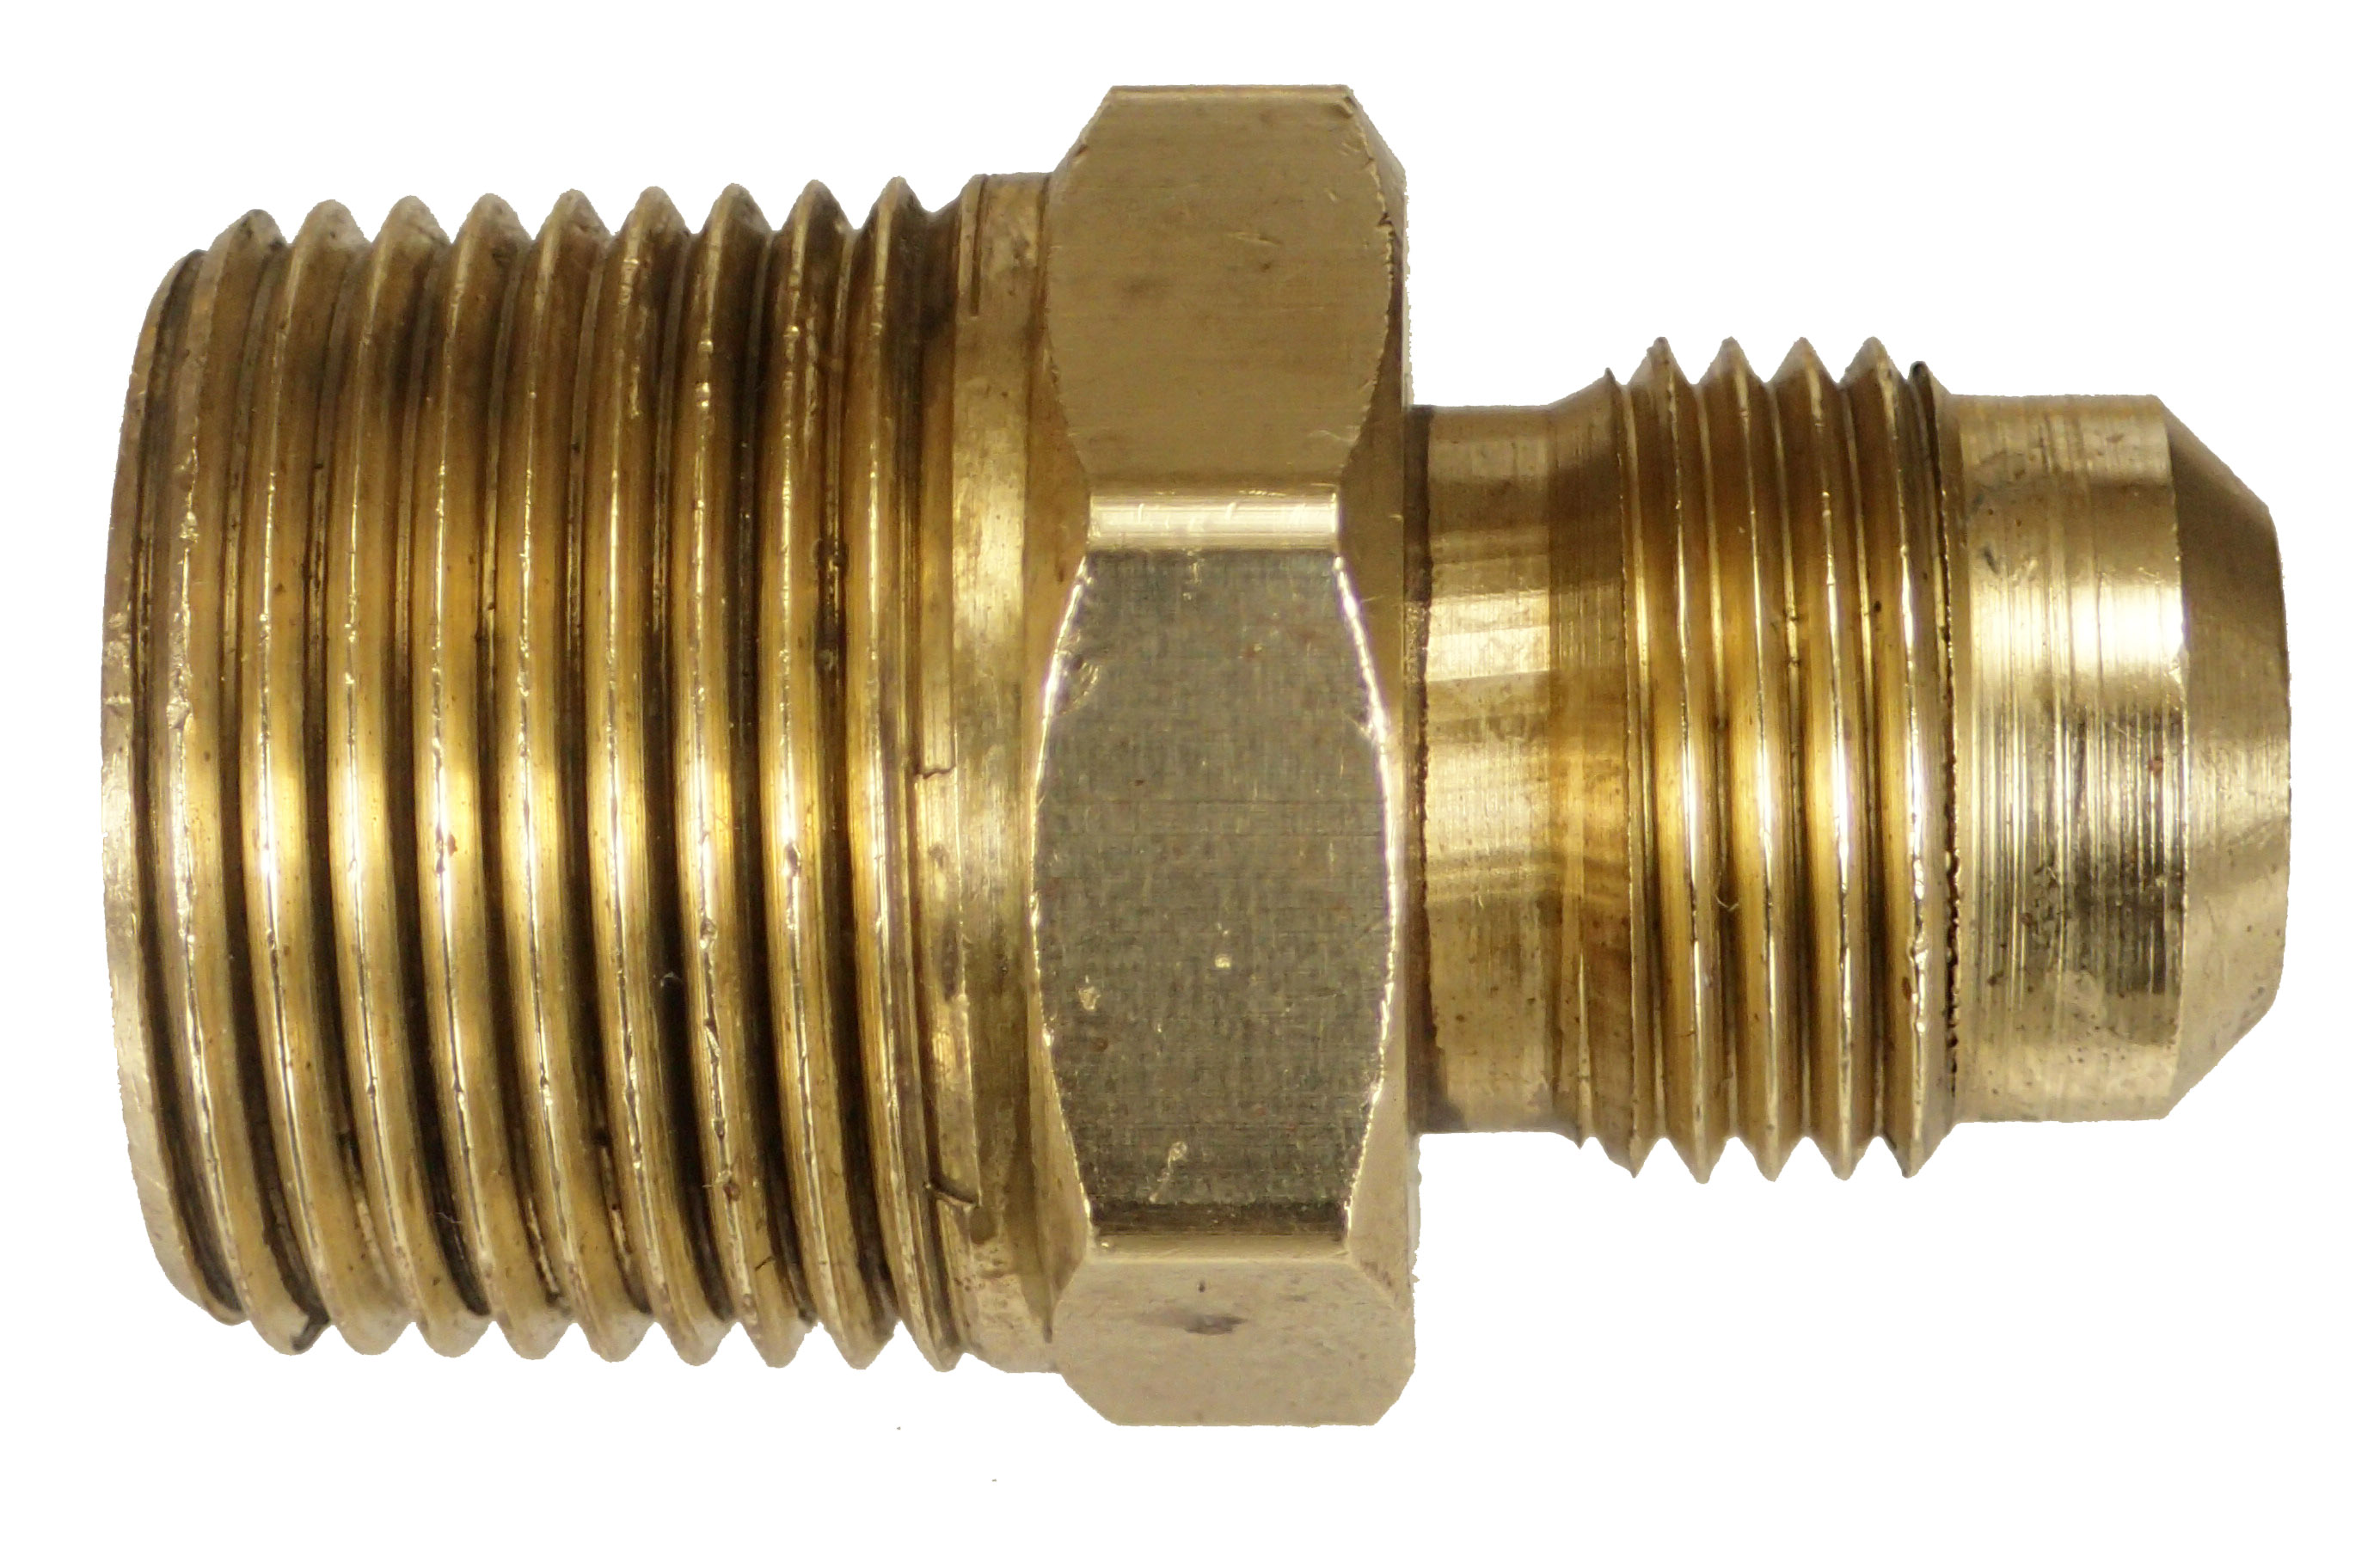 3/4 NPT to 1/2 Pipe Bushing Adapter Convert 1/2 Male to 3/4 Male Solid Brass Water Gas Air Hydraulic ProTool 110-11 